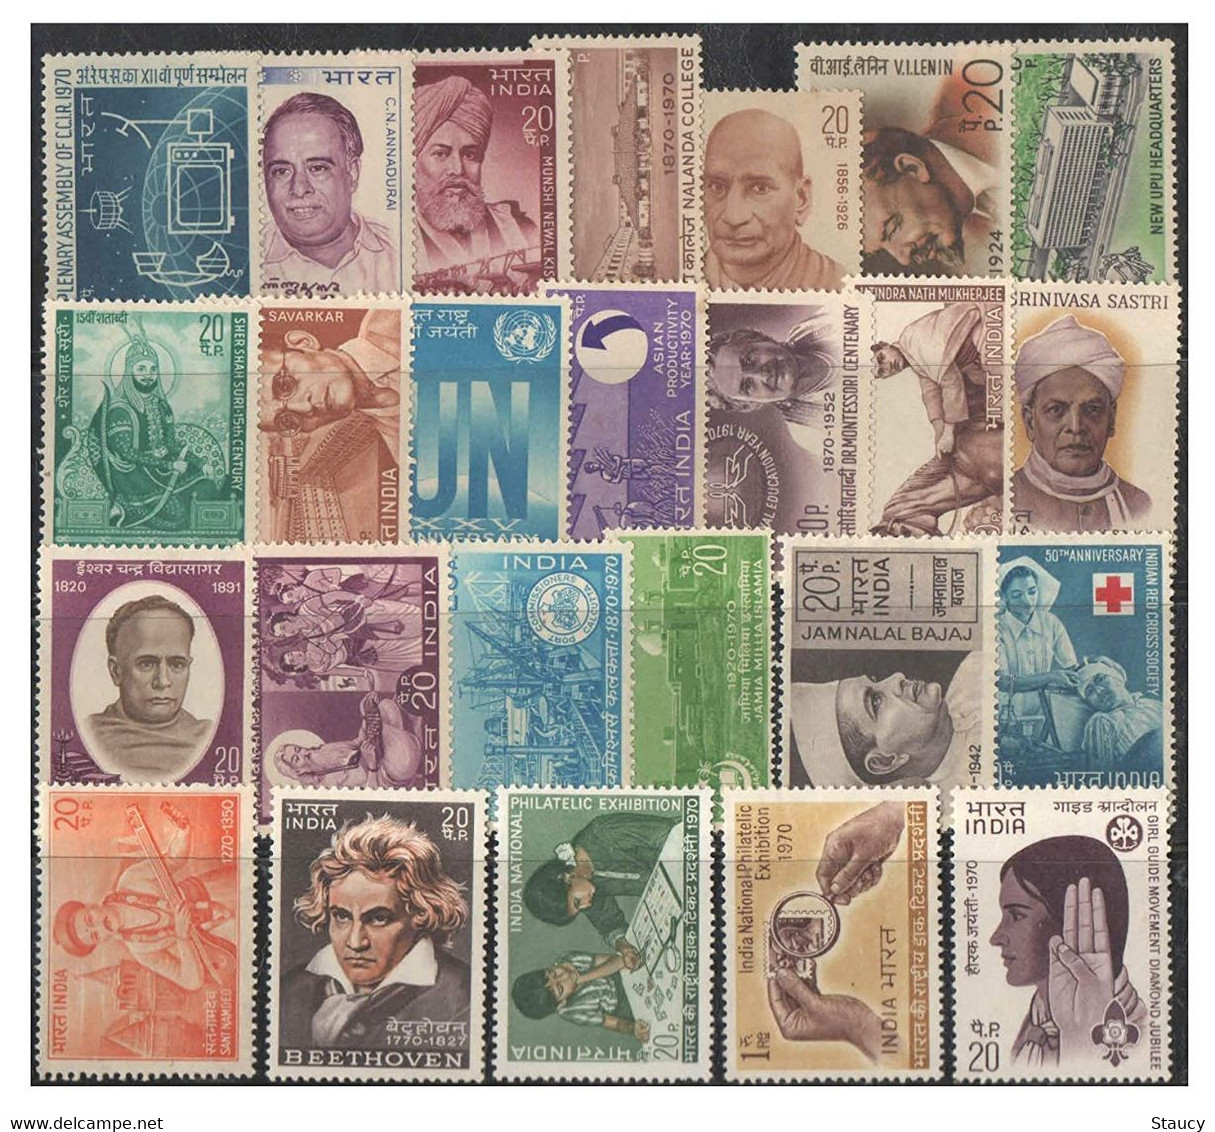 India 1970 Complete Year Pack / Set / Collection Total 25 Stamps (No Missing) MNH As Per Scan - Años Completos